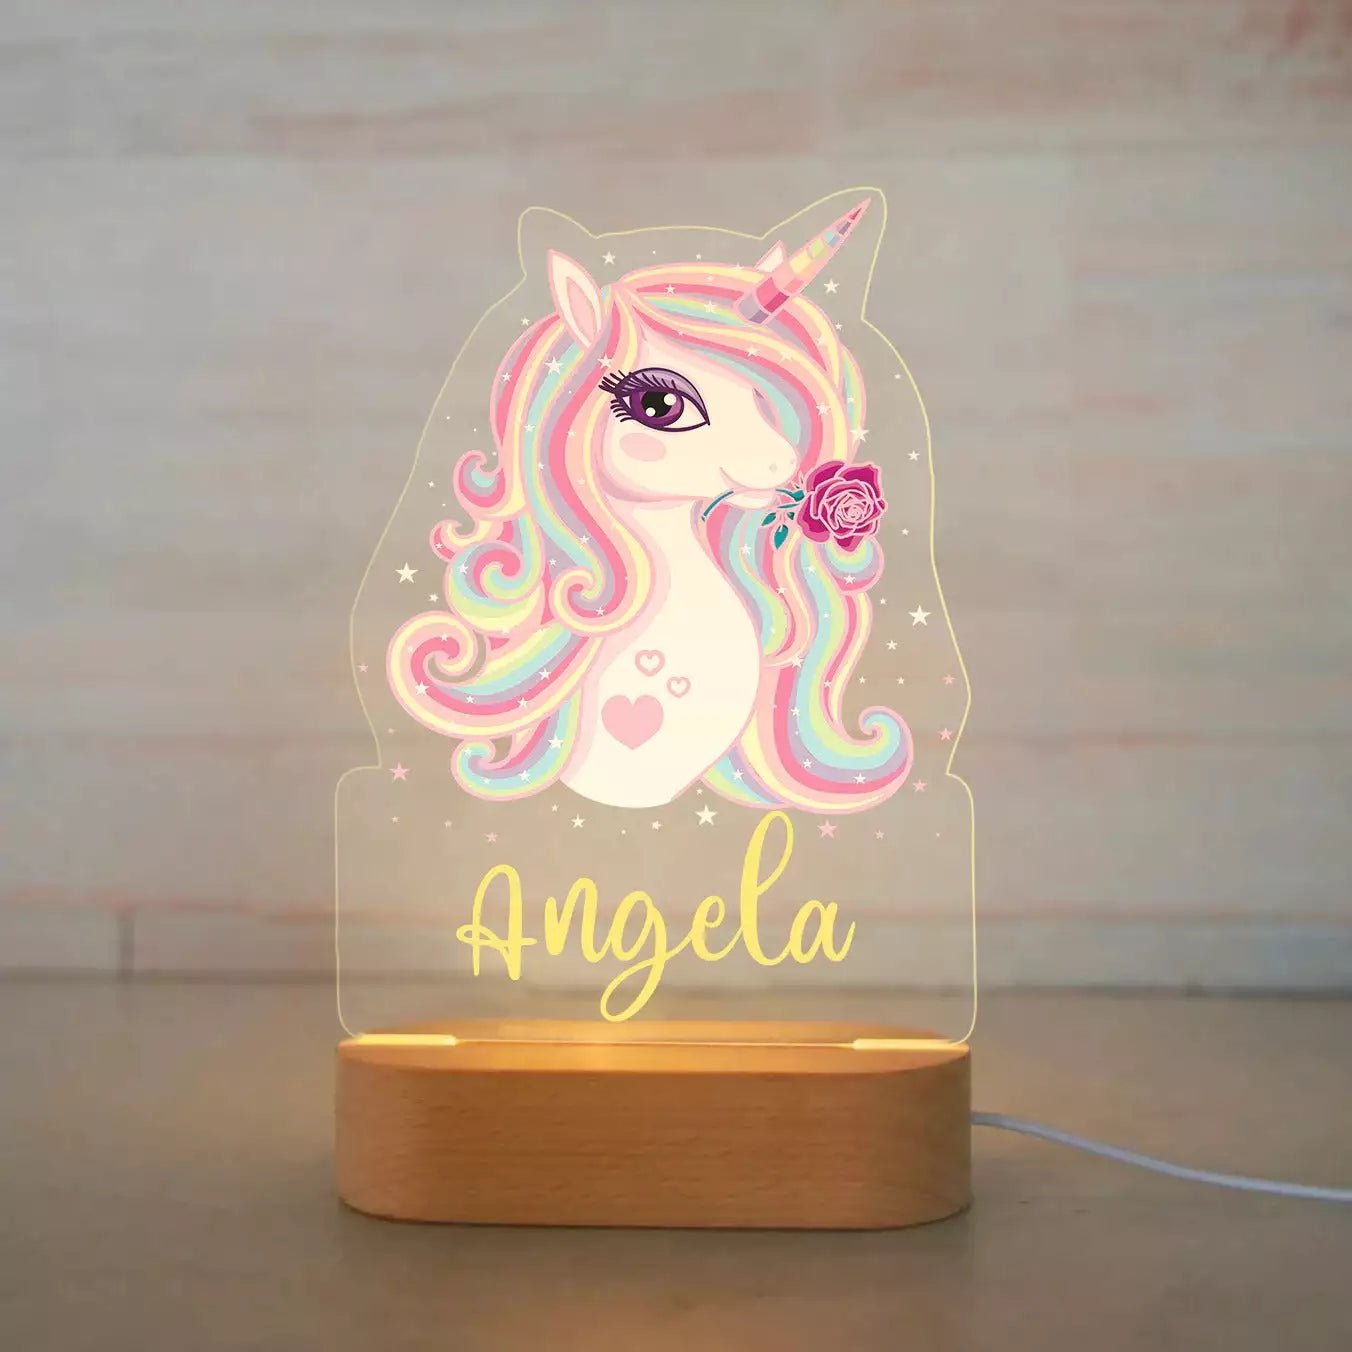 Customized Animal-themed Night Light for Kids - Personalized with Child's Name, Acrylic Lamp for Bedroom Decor Warm Light / 14Unicorn